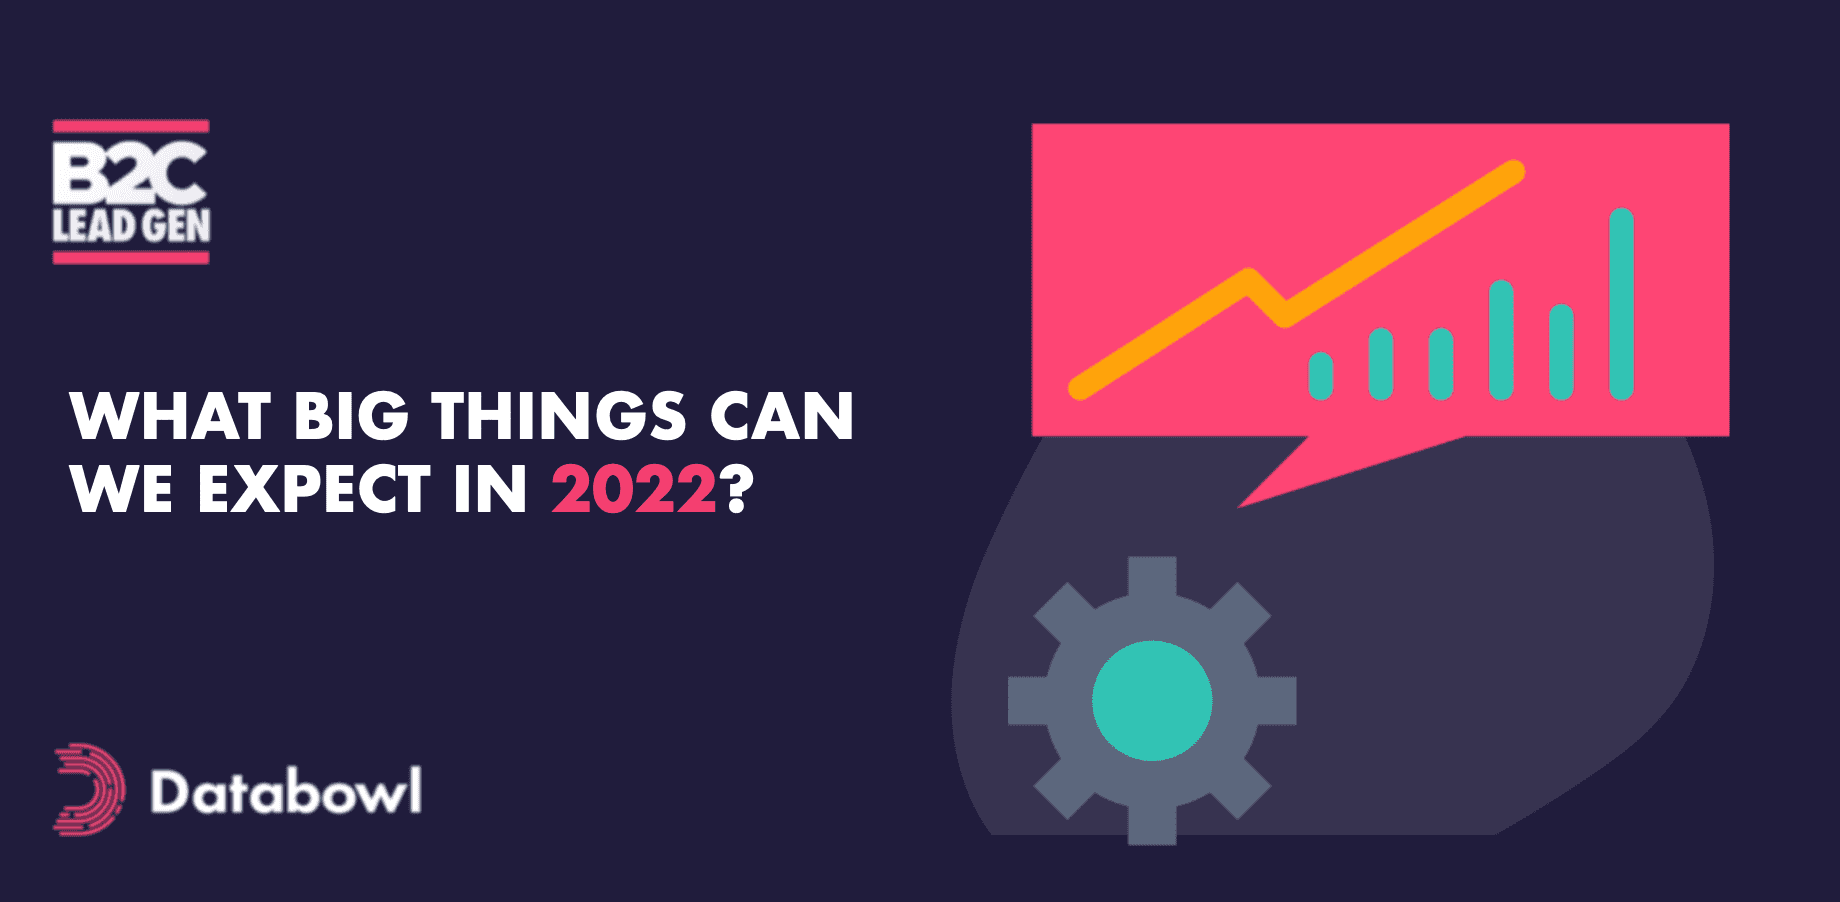 What Big Things Can We Expect In 2022?